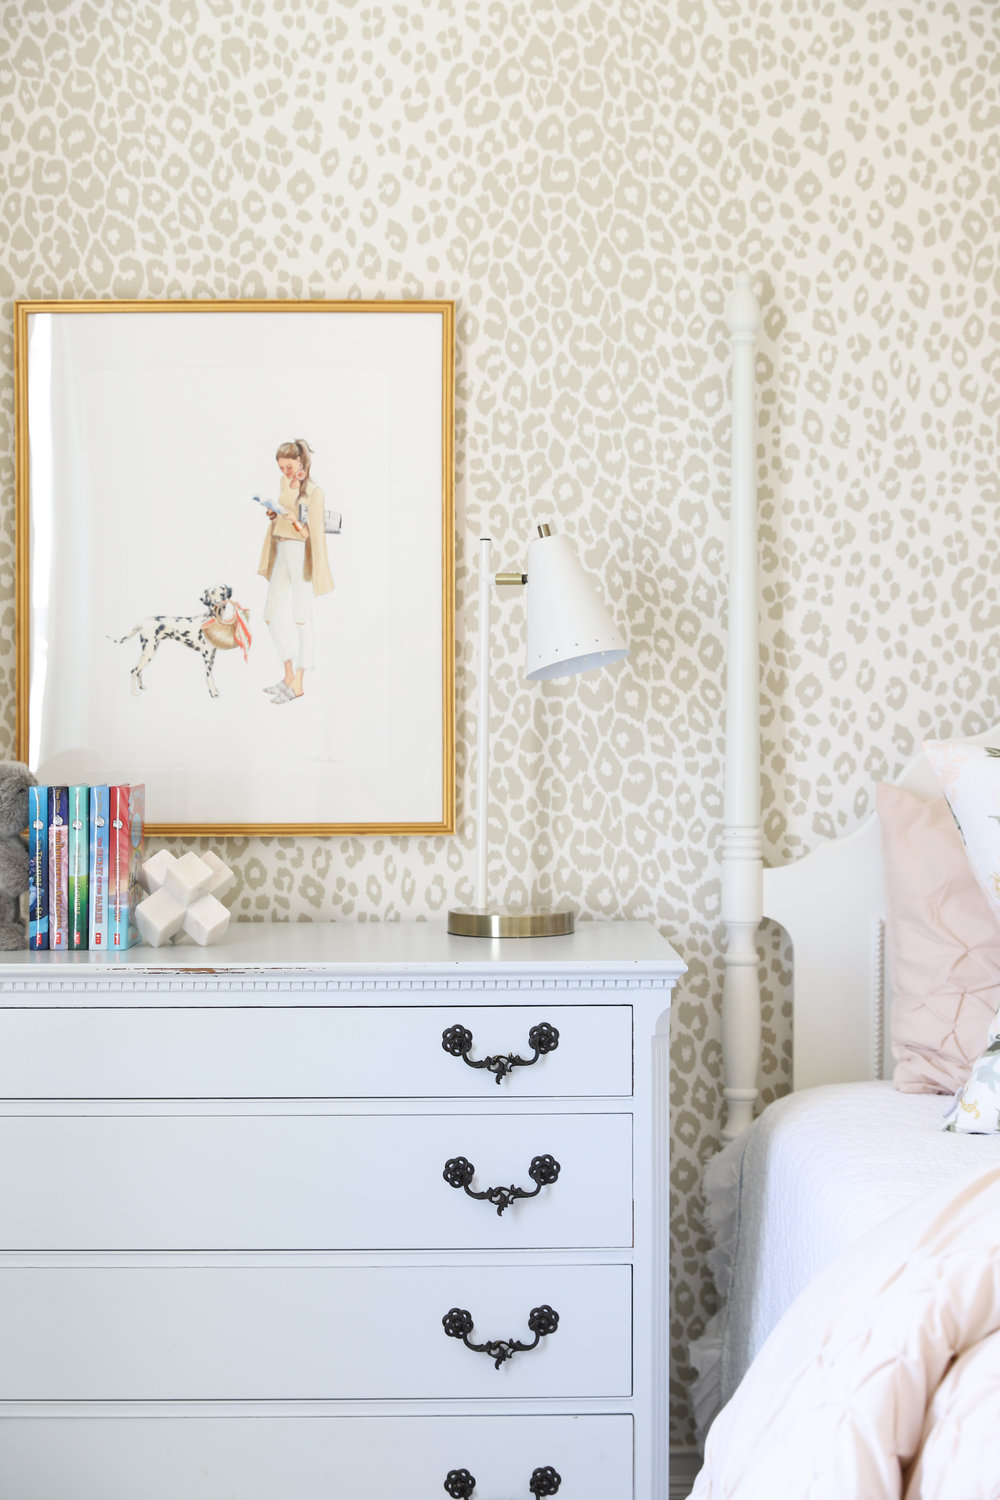 Artwork by Inslee Farris- Tween Girls Bedroom Design by Laura Design Co., Photo by Emily Kennedy